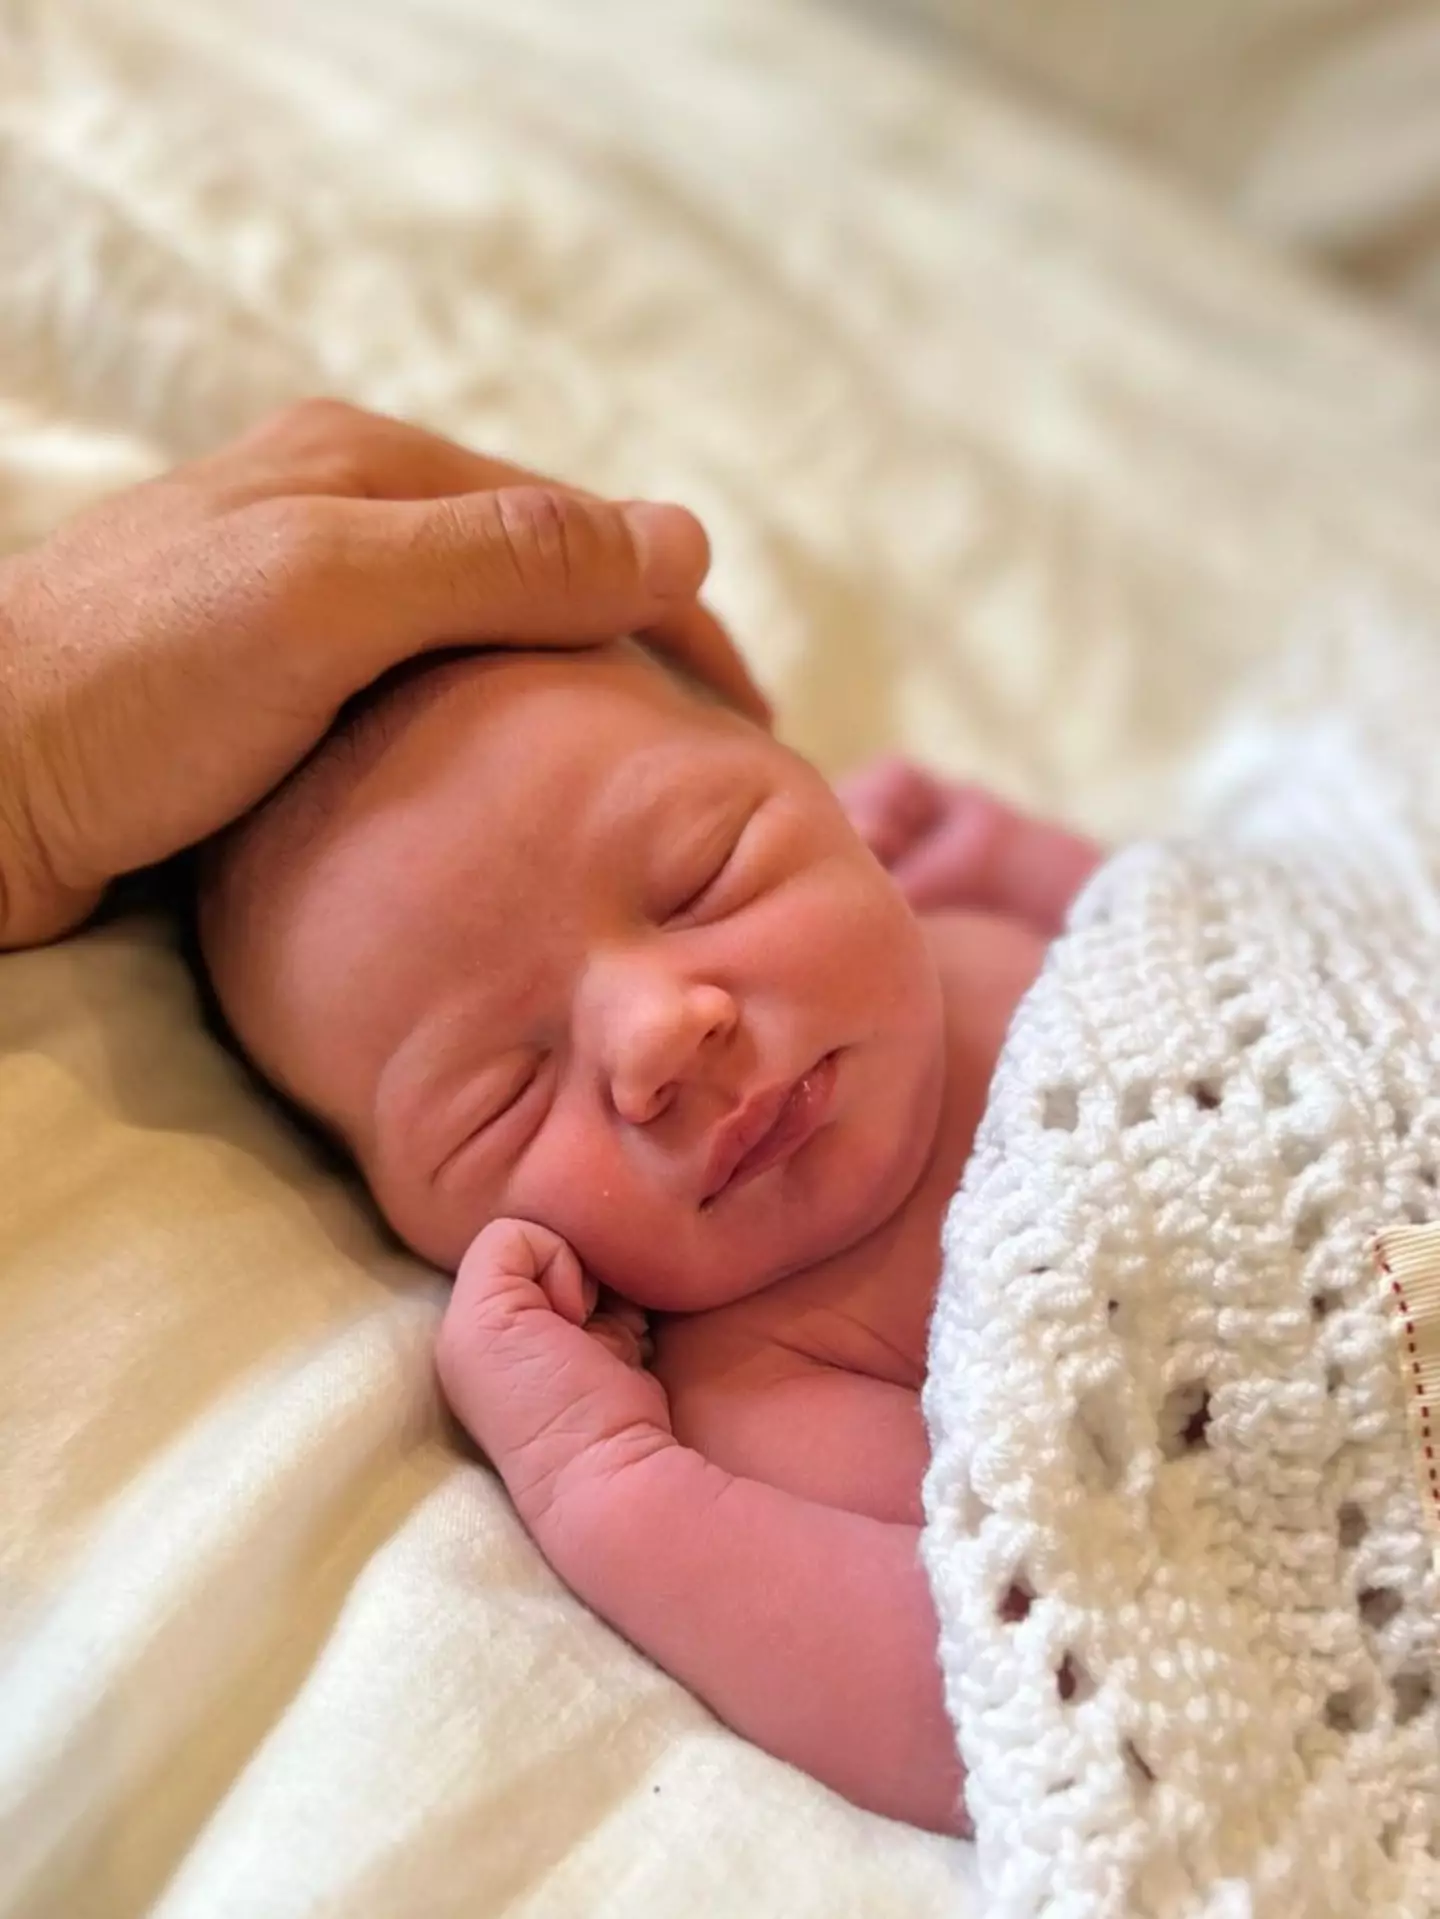 Rosie and Joe welcomed their little one on 8 September.